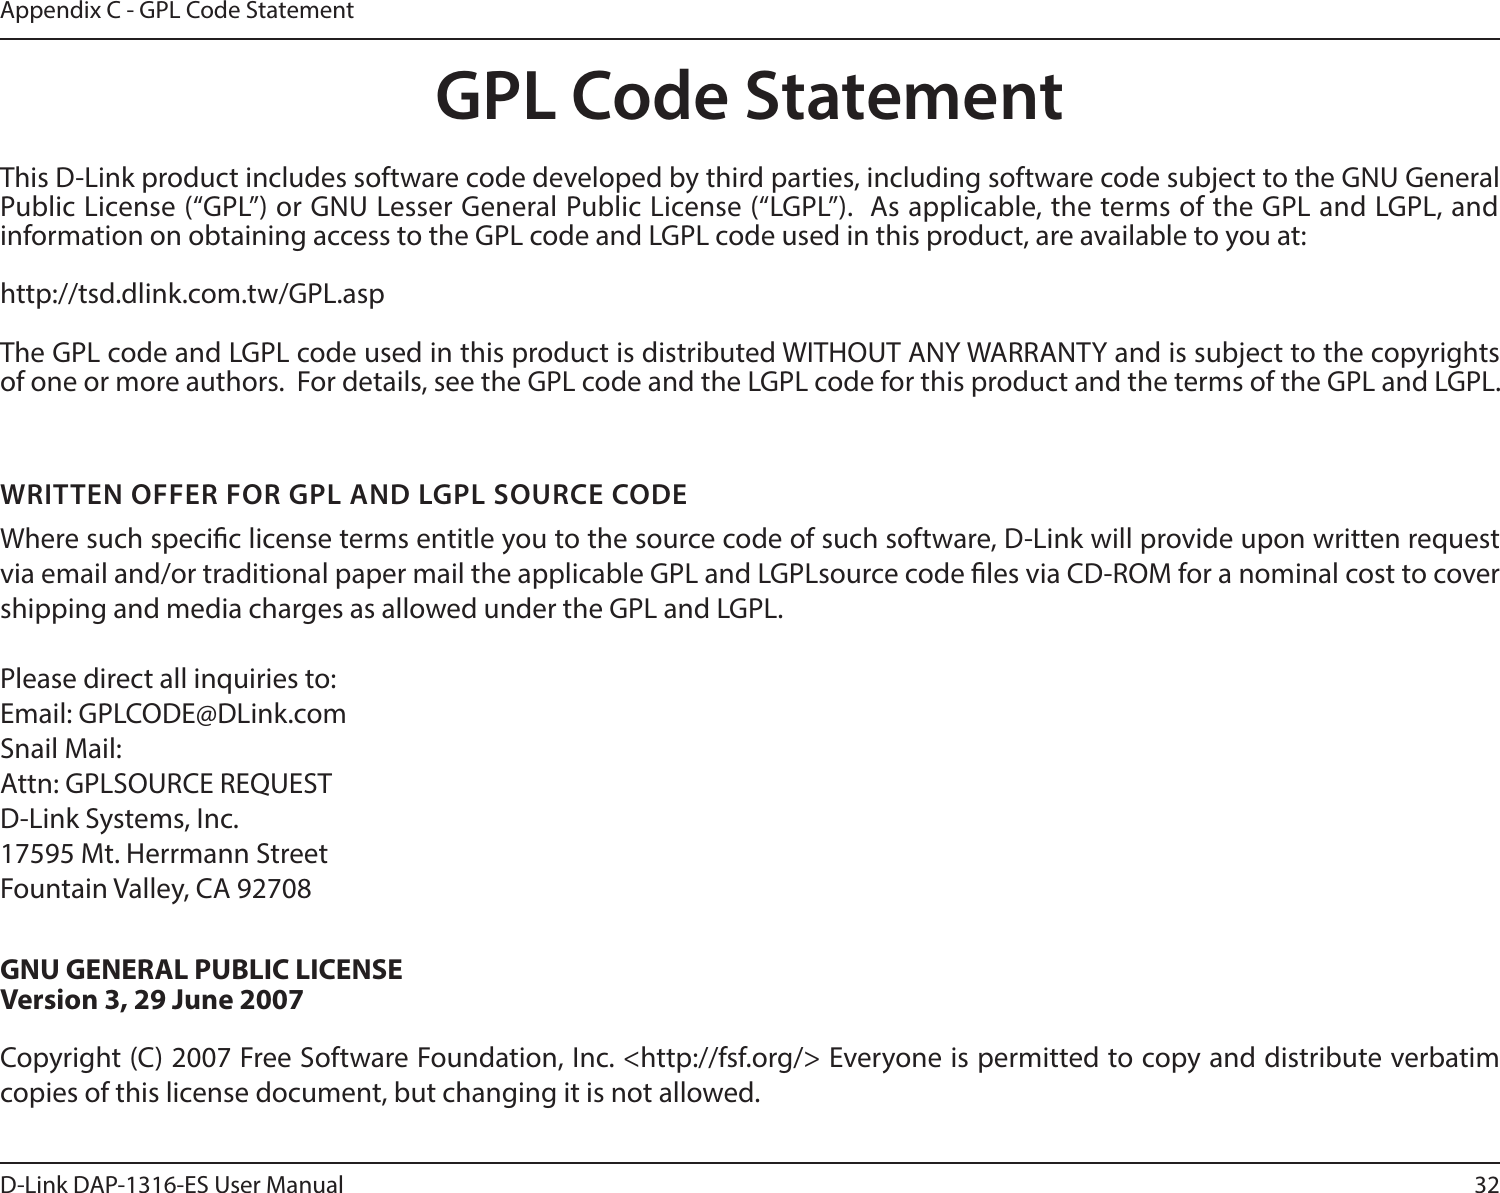 32D-Link DAP-1316-ES User ManualAppendix C - GPL Code StatementGPL Code StatementThis D-Link product includes software code developed by third parties, including software code subject to the GNU General Public License (“GPL”) or GNU Lesser General Public License (“LGPL”).  As applicable, the terms of the GPL and LGPL, and information on obtaining access to the GPL code and LGPL code used in this product, are available to you at:http://tsd.dlink.com.tw/GPL.aspThe GPL code and LGPL code used in this product is distributed WITHOUT ANY WARRANTY and is subject to the copyrights of one or more authors.  For details, see the GPL code and the LGPL code for this product and the terms of the GPL and LGPL.WRITTEN OFFER FOR GPL AND LGPL SOURCE CODEWhere such specic license terms entitle you to the source code of such software, D-Link will provide upon written request via email and/or traditional paper mail the applicable GPL and LGPLsource code les via CD-ROM for a nominal cost to cover shipping and media charges as allowed under the GPL and LGPL.  Please direct all inquiries to:Email: GPLCODE@DLink.comSnail Mail:Attn: GPLSOURCE REQUESTD-Link Systems, Inc.17595 Mt. Herrmann StreetFountain Valley, CA 92708GNU GENERAL PUBLIC LICENSEVersion 3, 29 June 2007Copyright (C) 2007 Free Software Foundation, Inc. &lt;http://fsf.org/&gt; Everyone is permitted to copy and distribute verbatim copies of this license document, but changing it is not allowed.